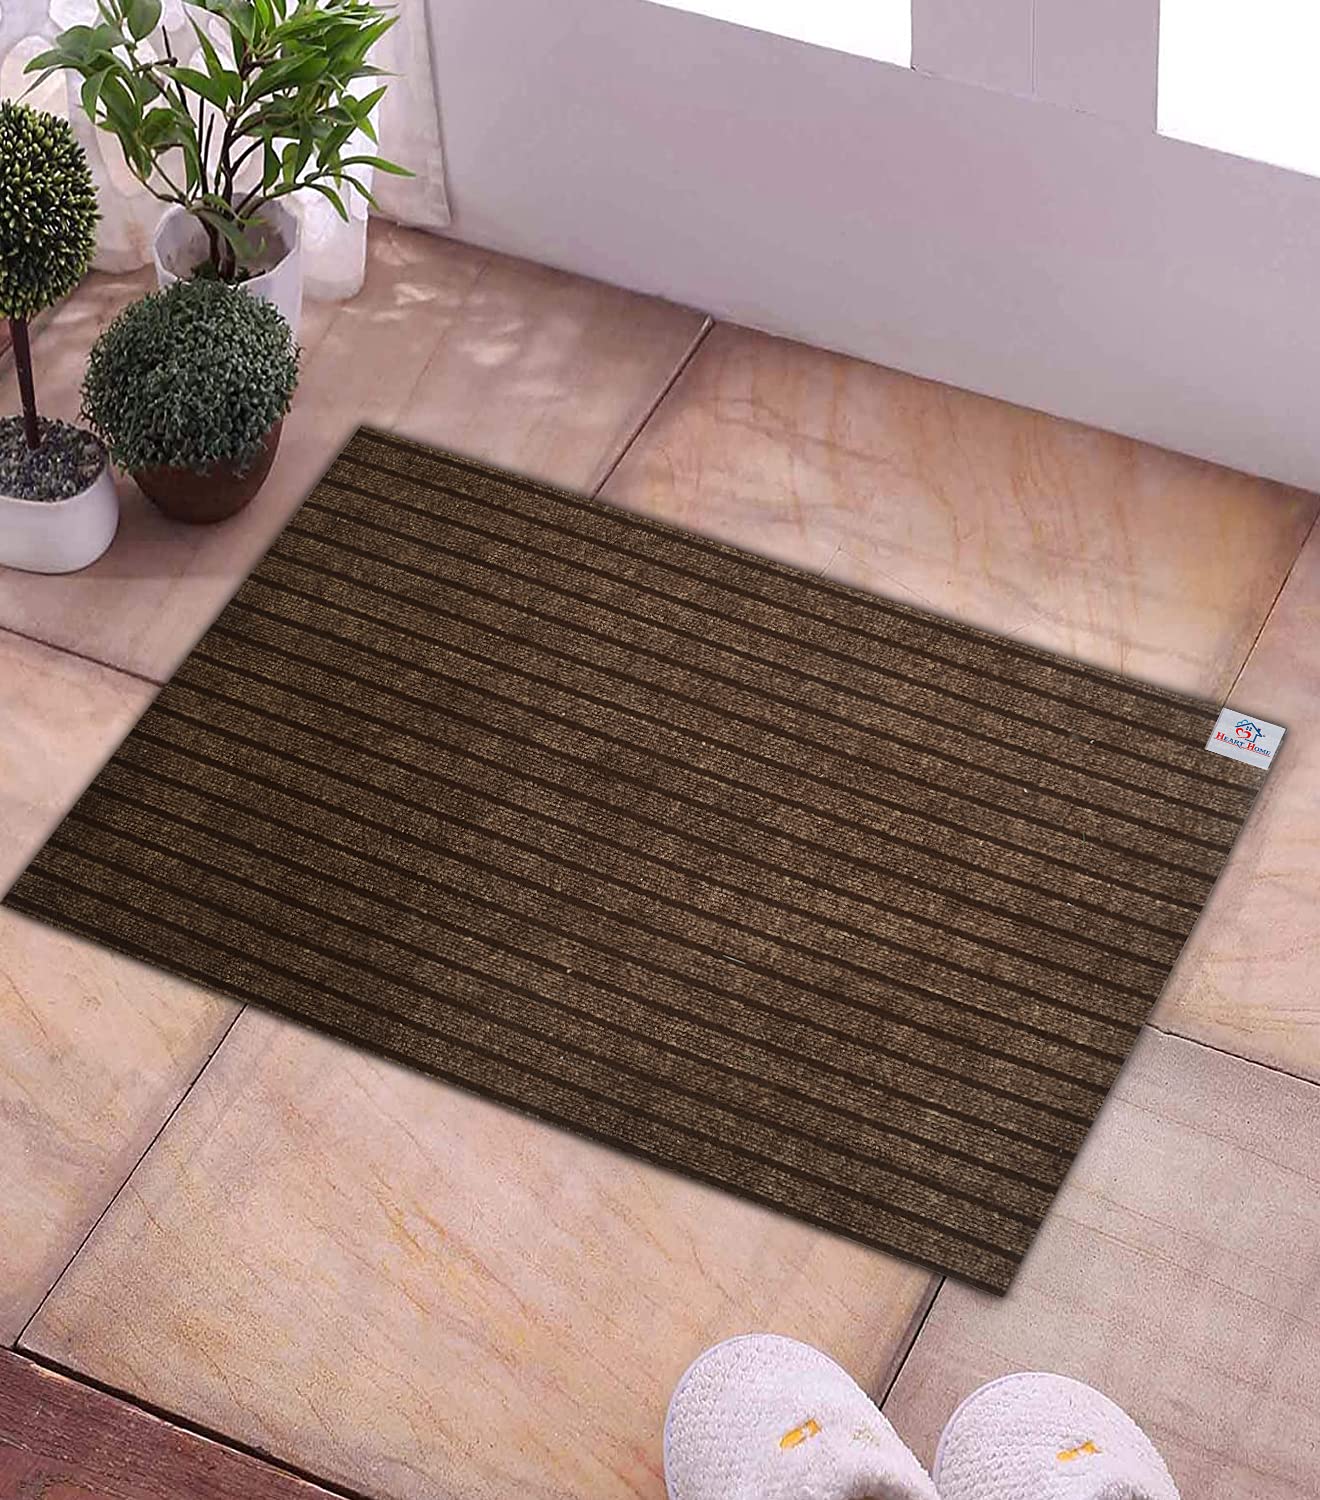 Heart Home All Weather Entry and Back Yard Door Mat, Non-Slip Rubber Backing, Absorbent and Waterproof, Dirt Trapping Rugs for Entryway- Pack of 2-16"x24"(Brown), Standard (HS_36_HEARTH018403)